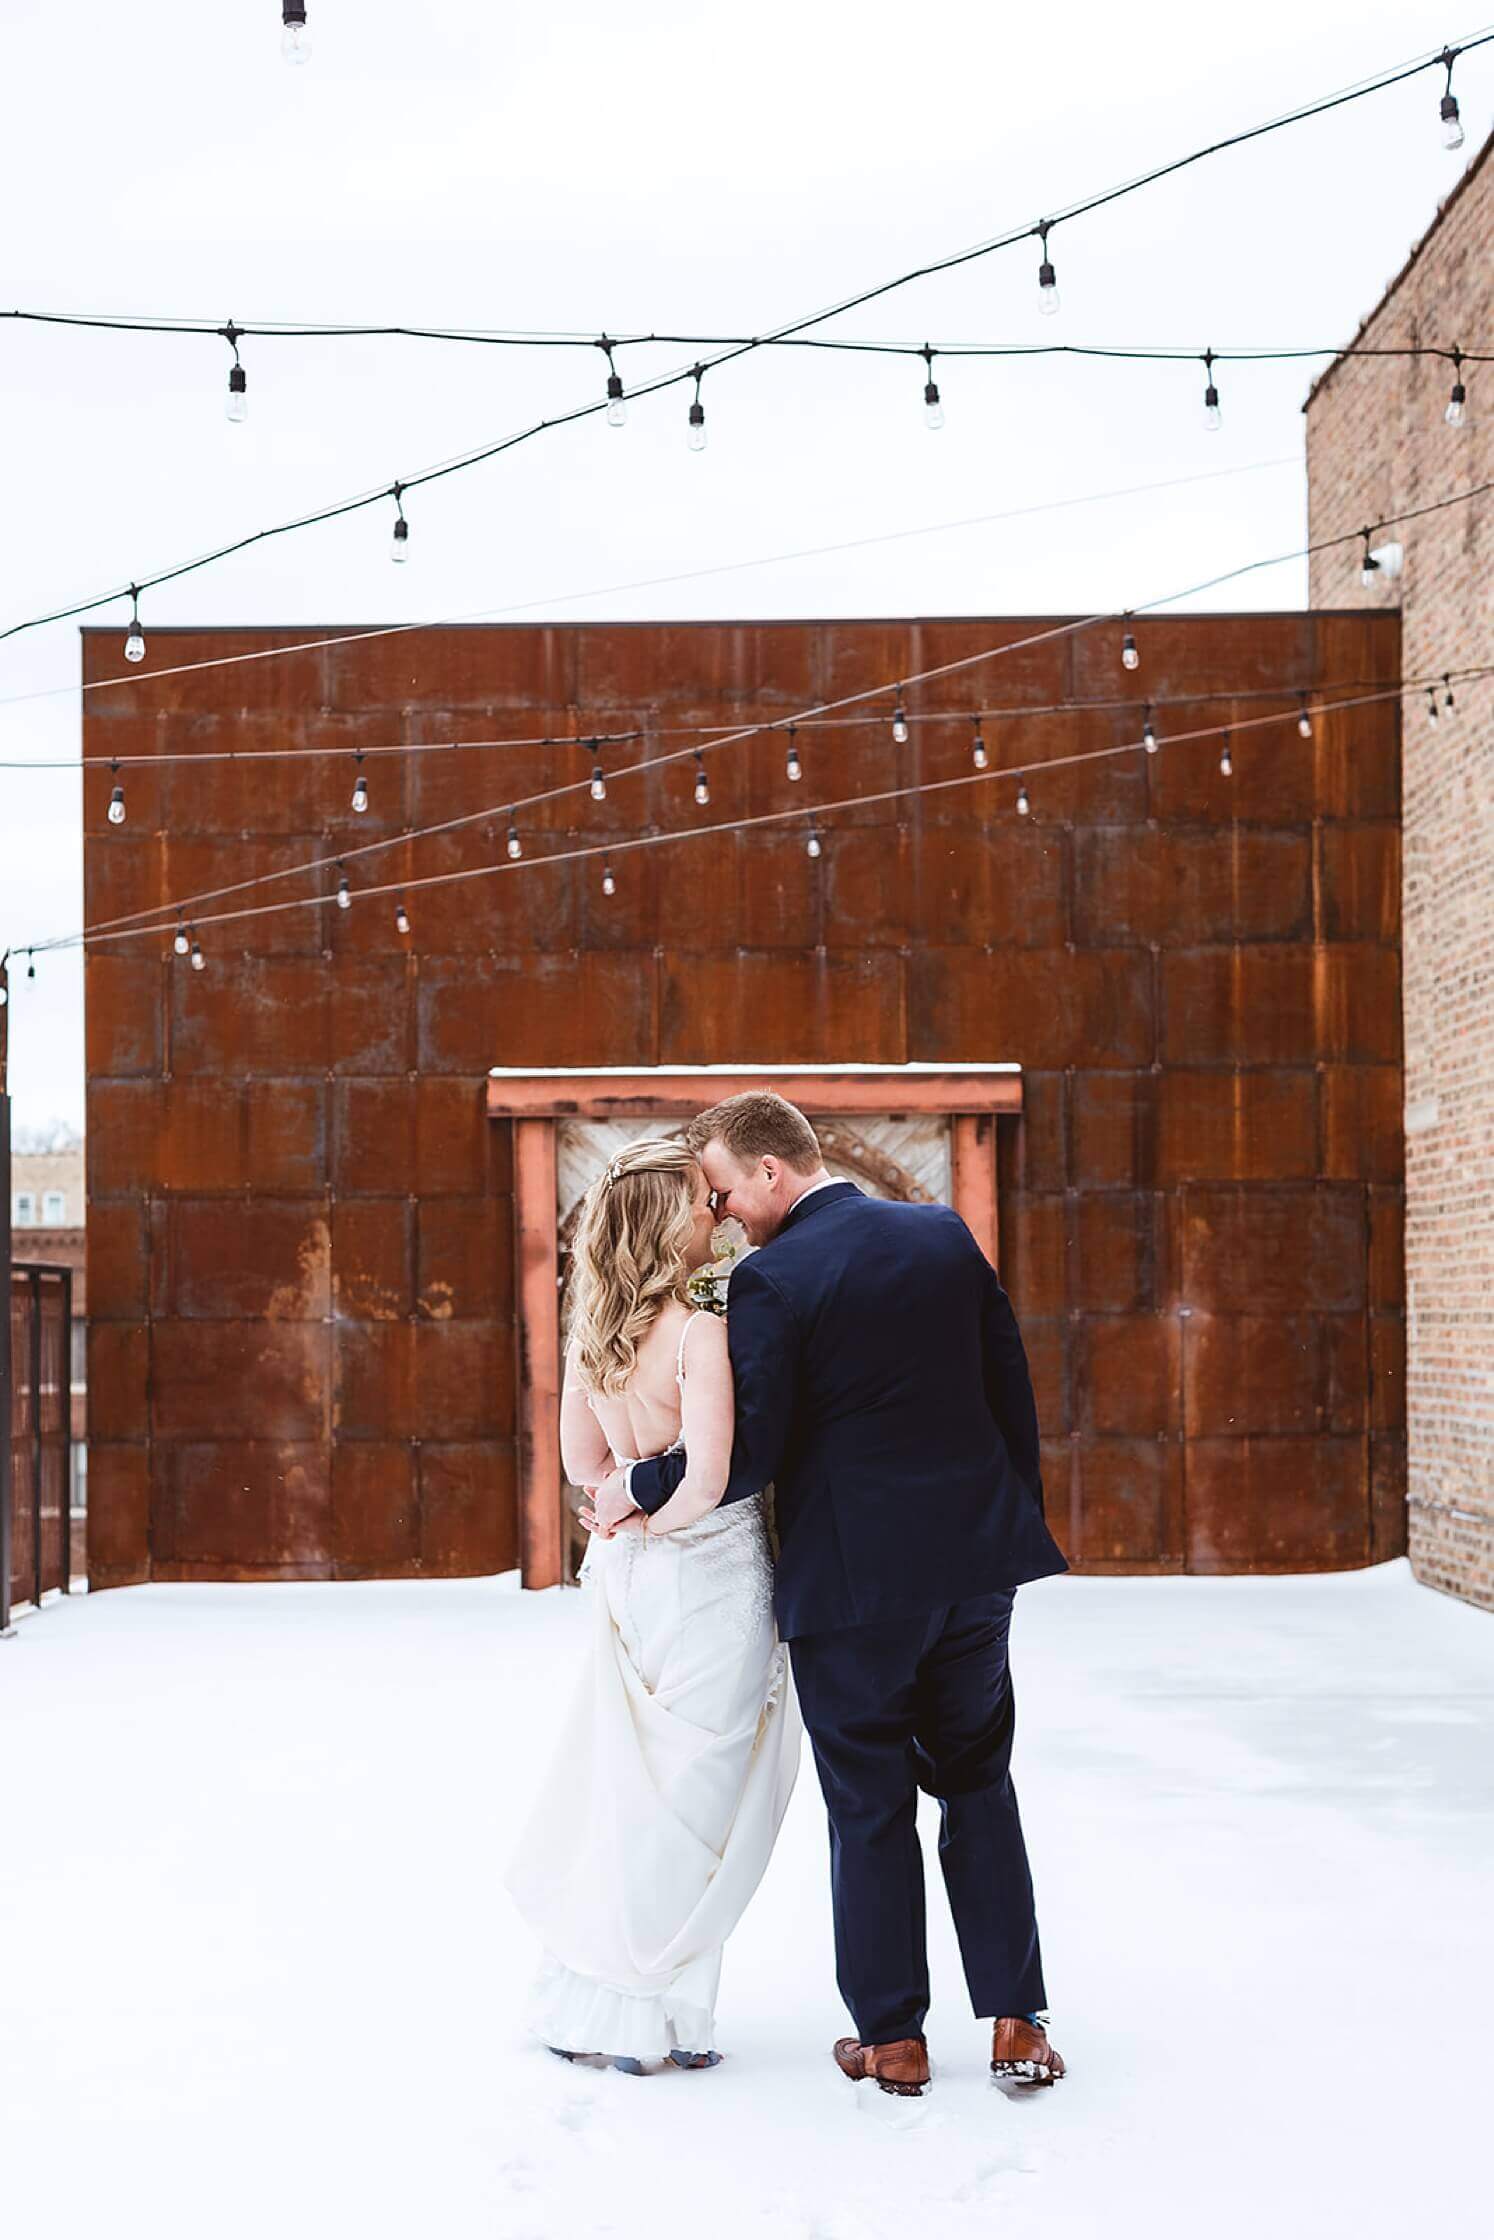 Bride and groom kissing in the snow at winter wedding venue